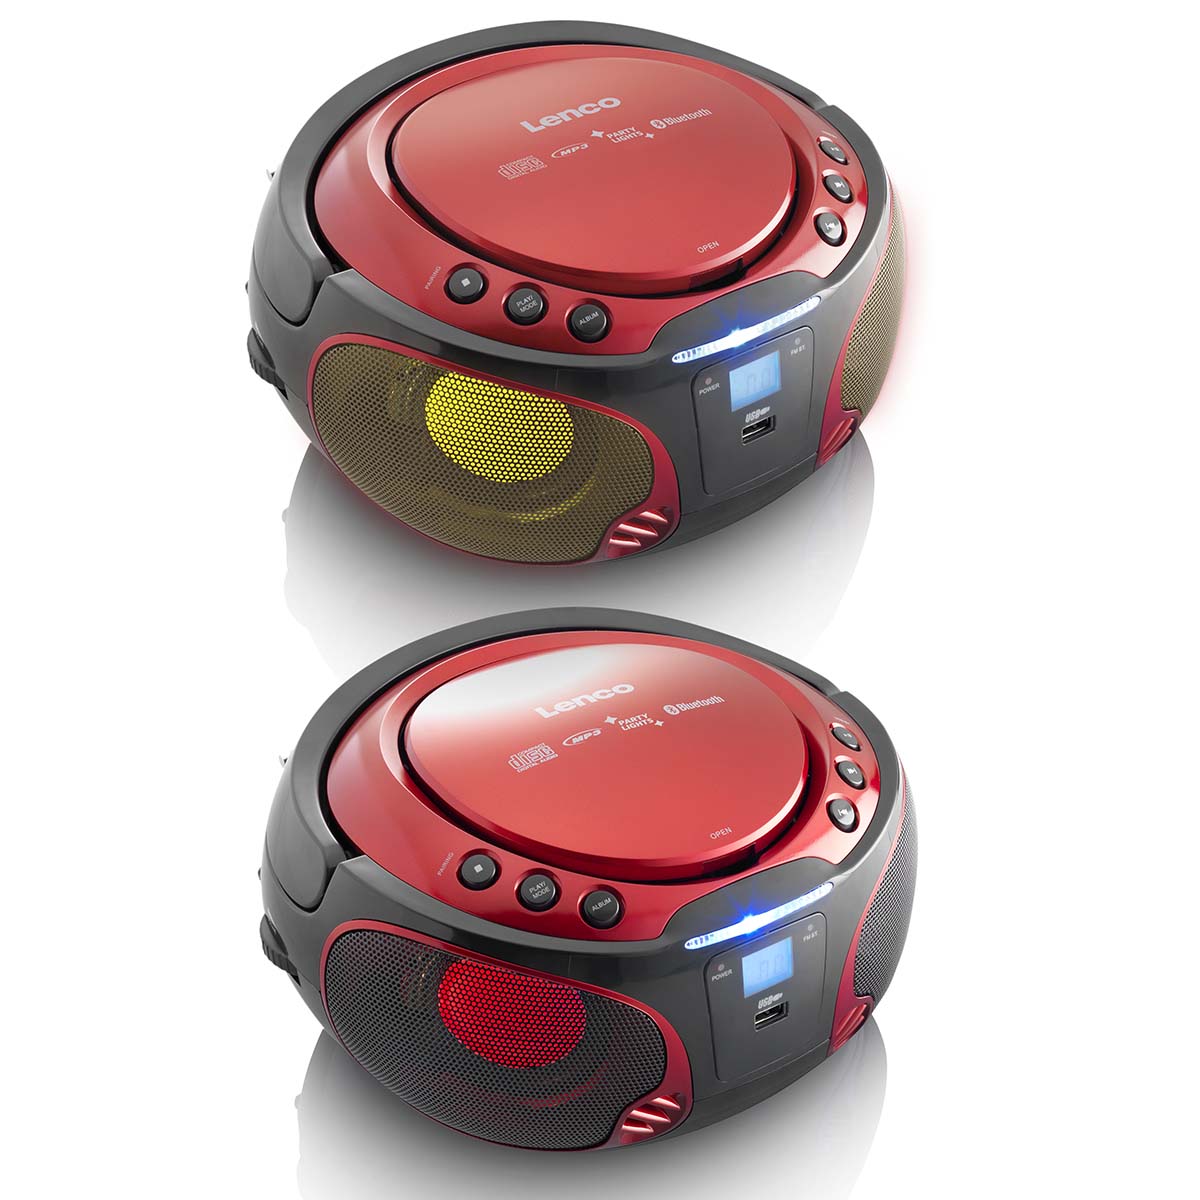 SCD-550RD Tragbares UKW-Radio CD/MP3/USB/Bluetooth-Player® mit LED-Beleuchtung Rot